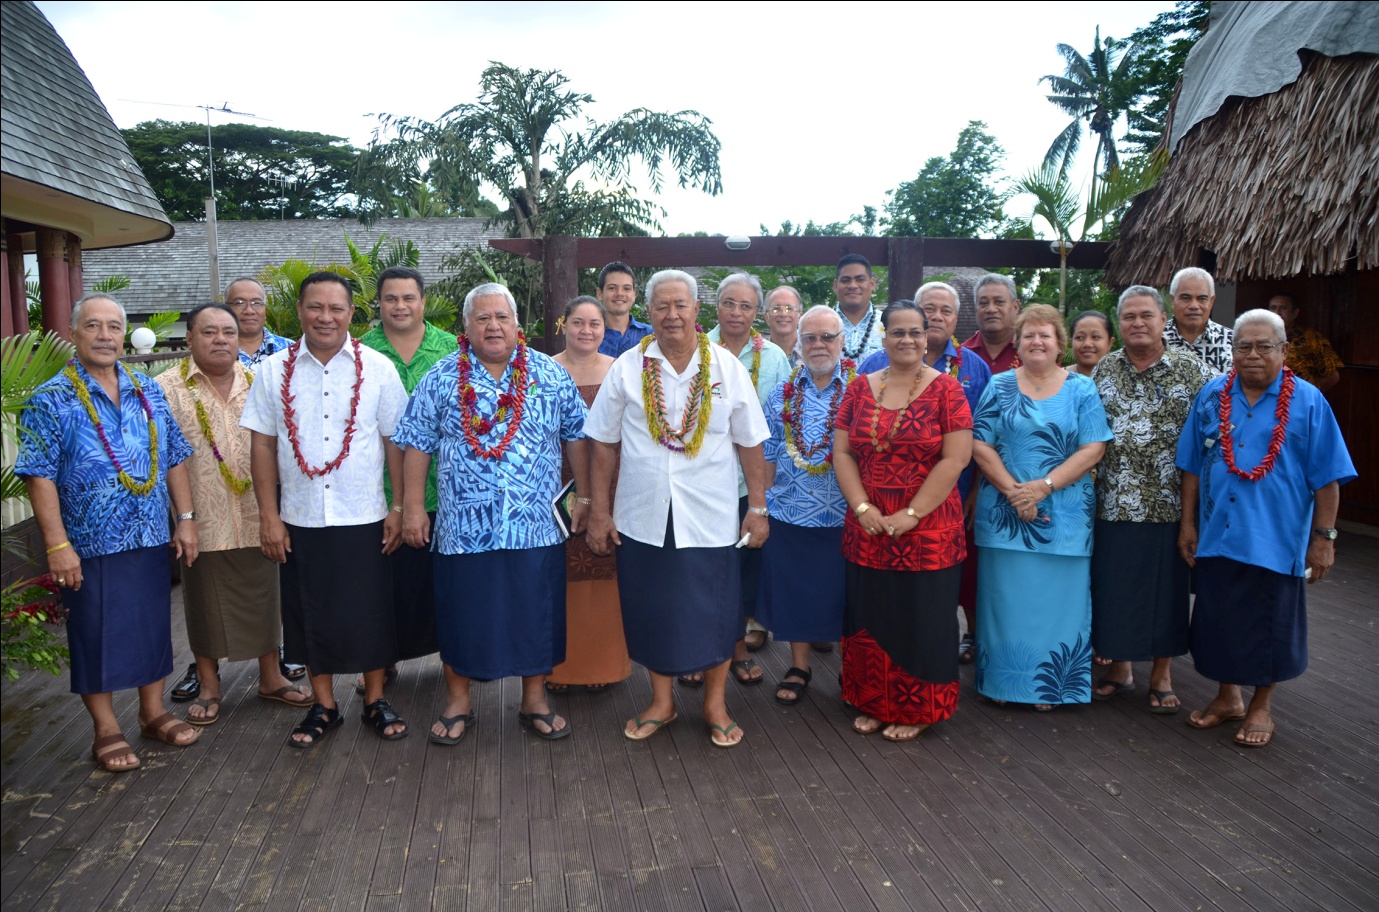 Prime Minister Of Samoa Pays Tribute To Baha I Community On 60th Anniversary One Country